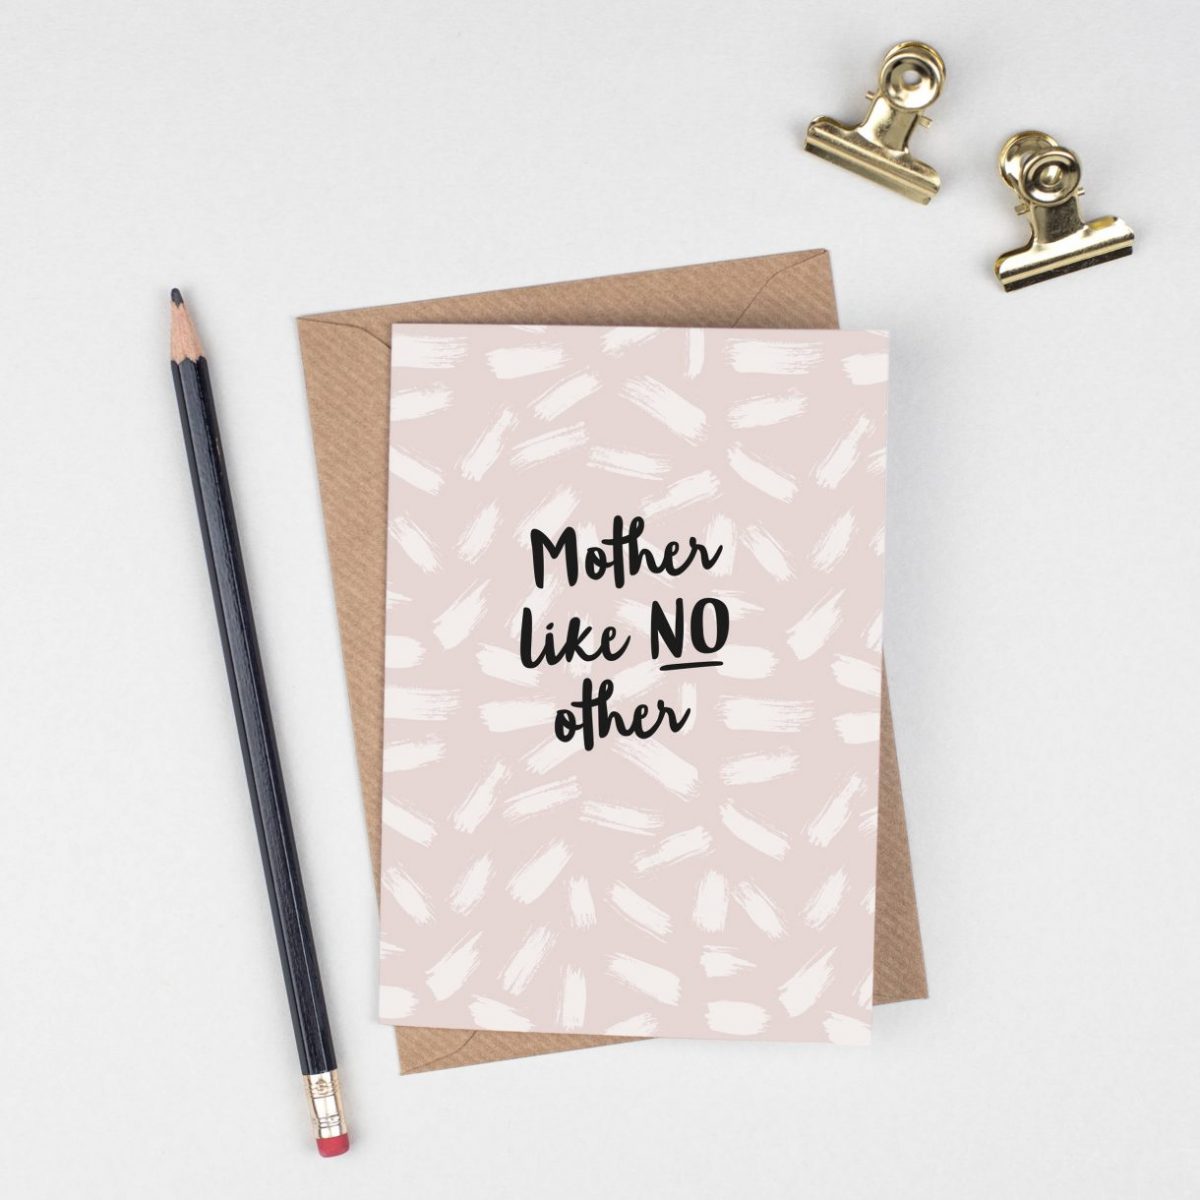 Mothers Day Card Funny, Mother Like No Other, Best Mum Card, Birthday Card for Mummy, Mothers Day Gift, New Mum, Patterned Brush Lettering